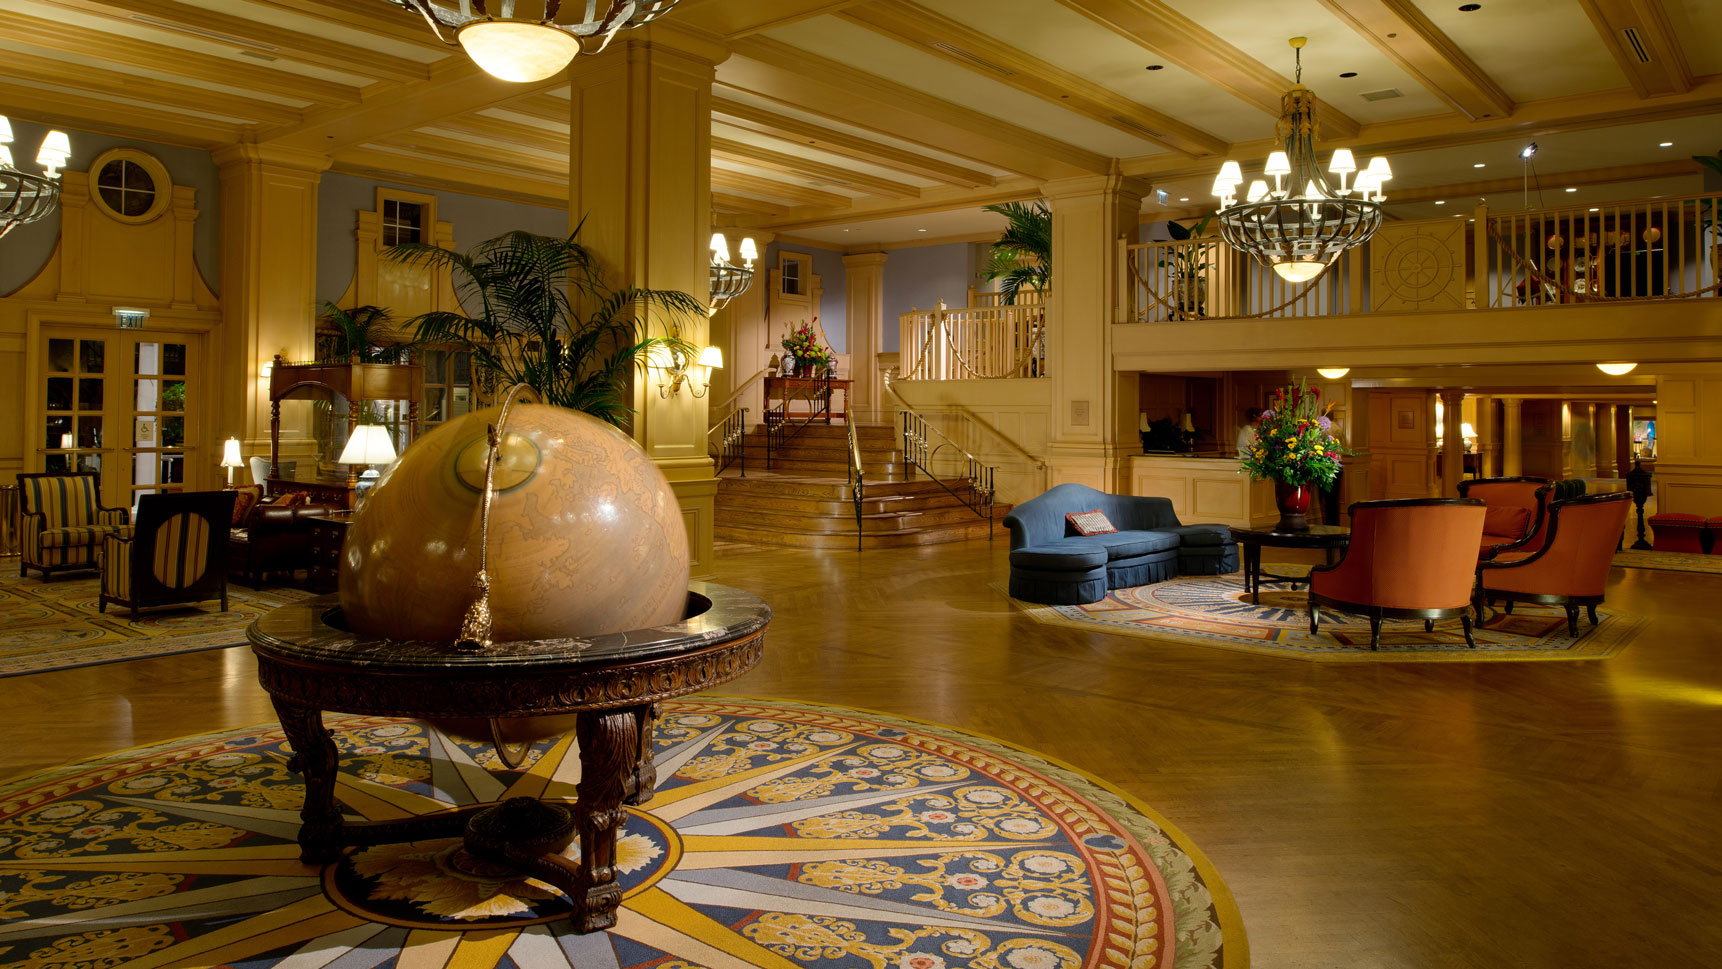 Yacht club lobby featuring large globe and seating areas